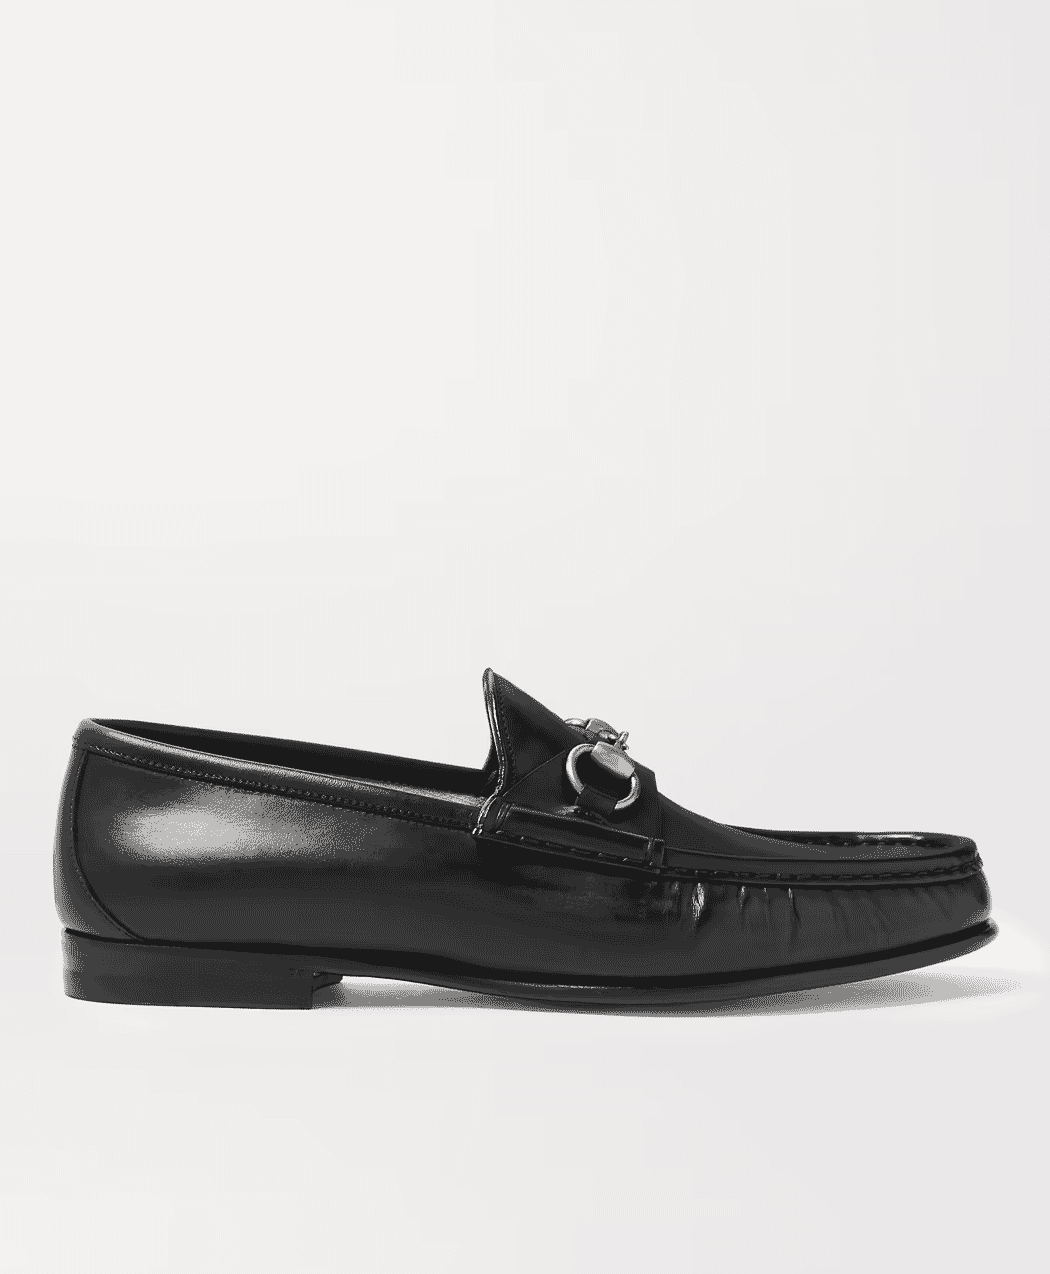 How to wear loafers with jeans for men | OPUMO Magazine | OPUMO Magazine